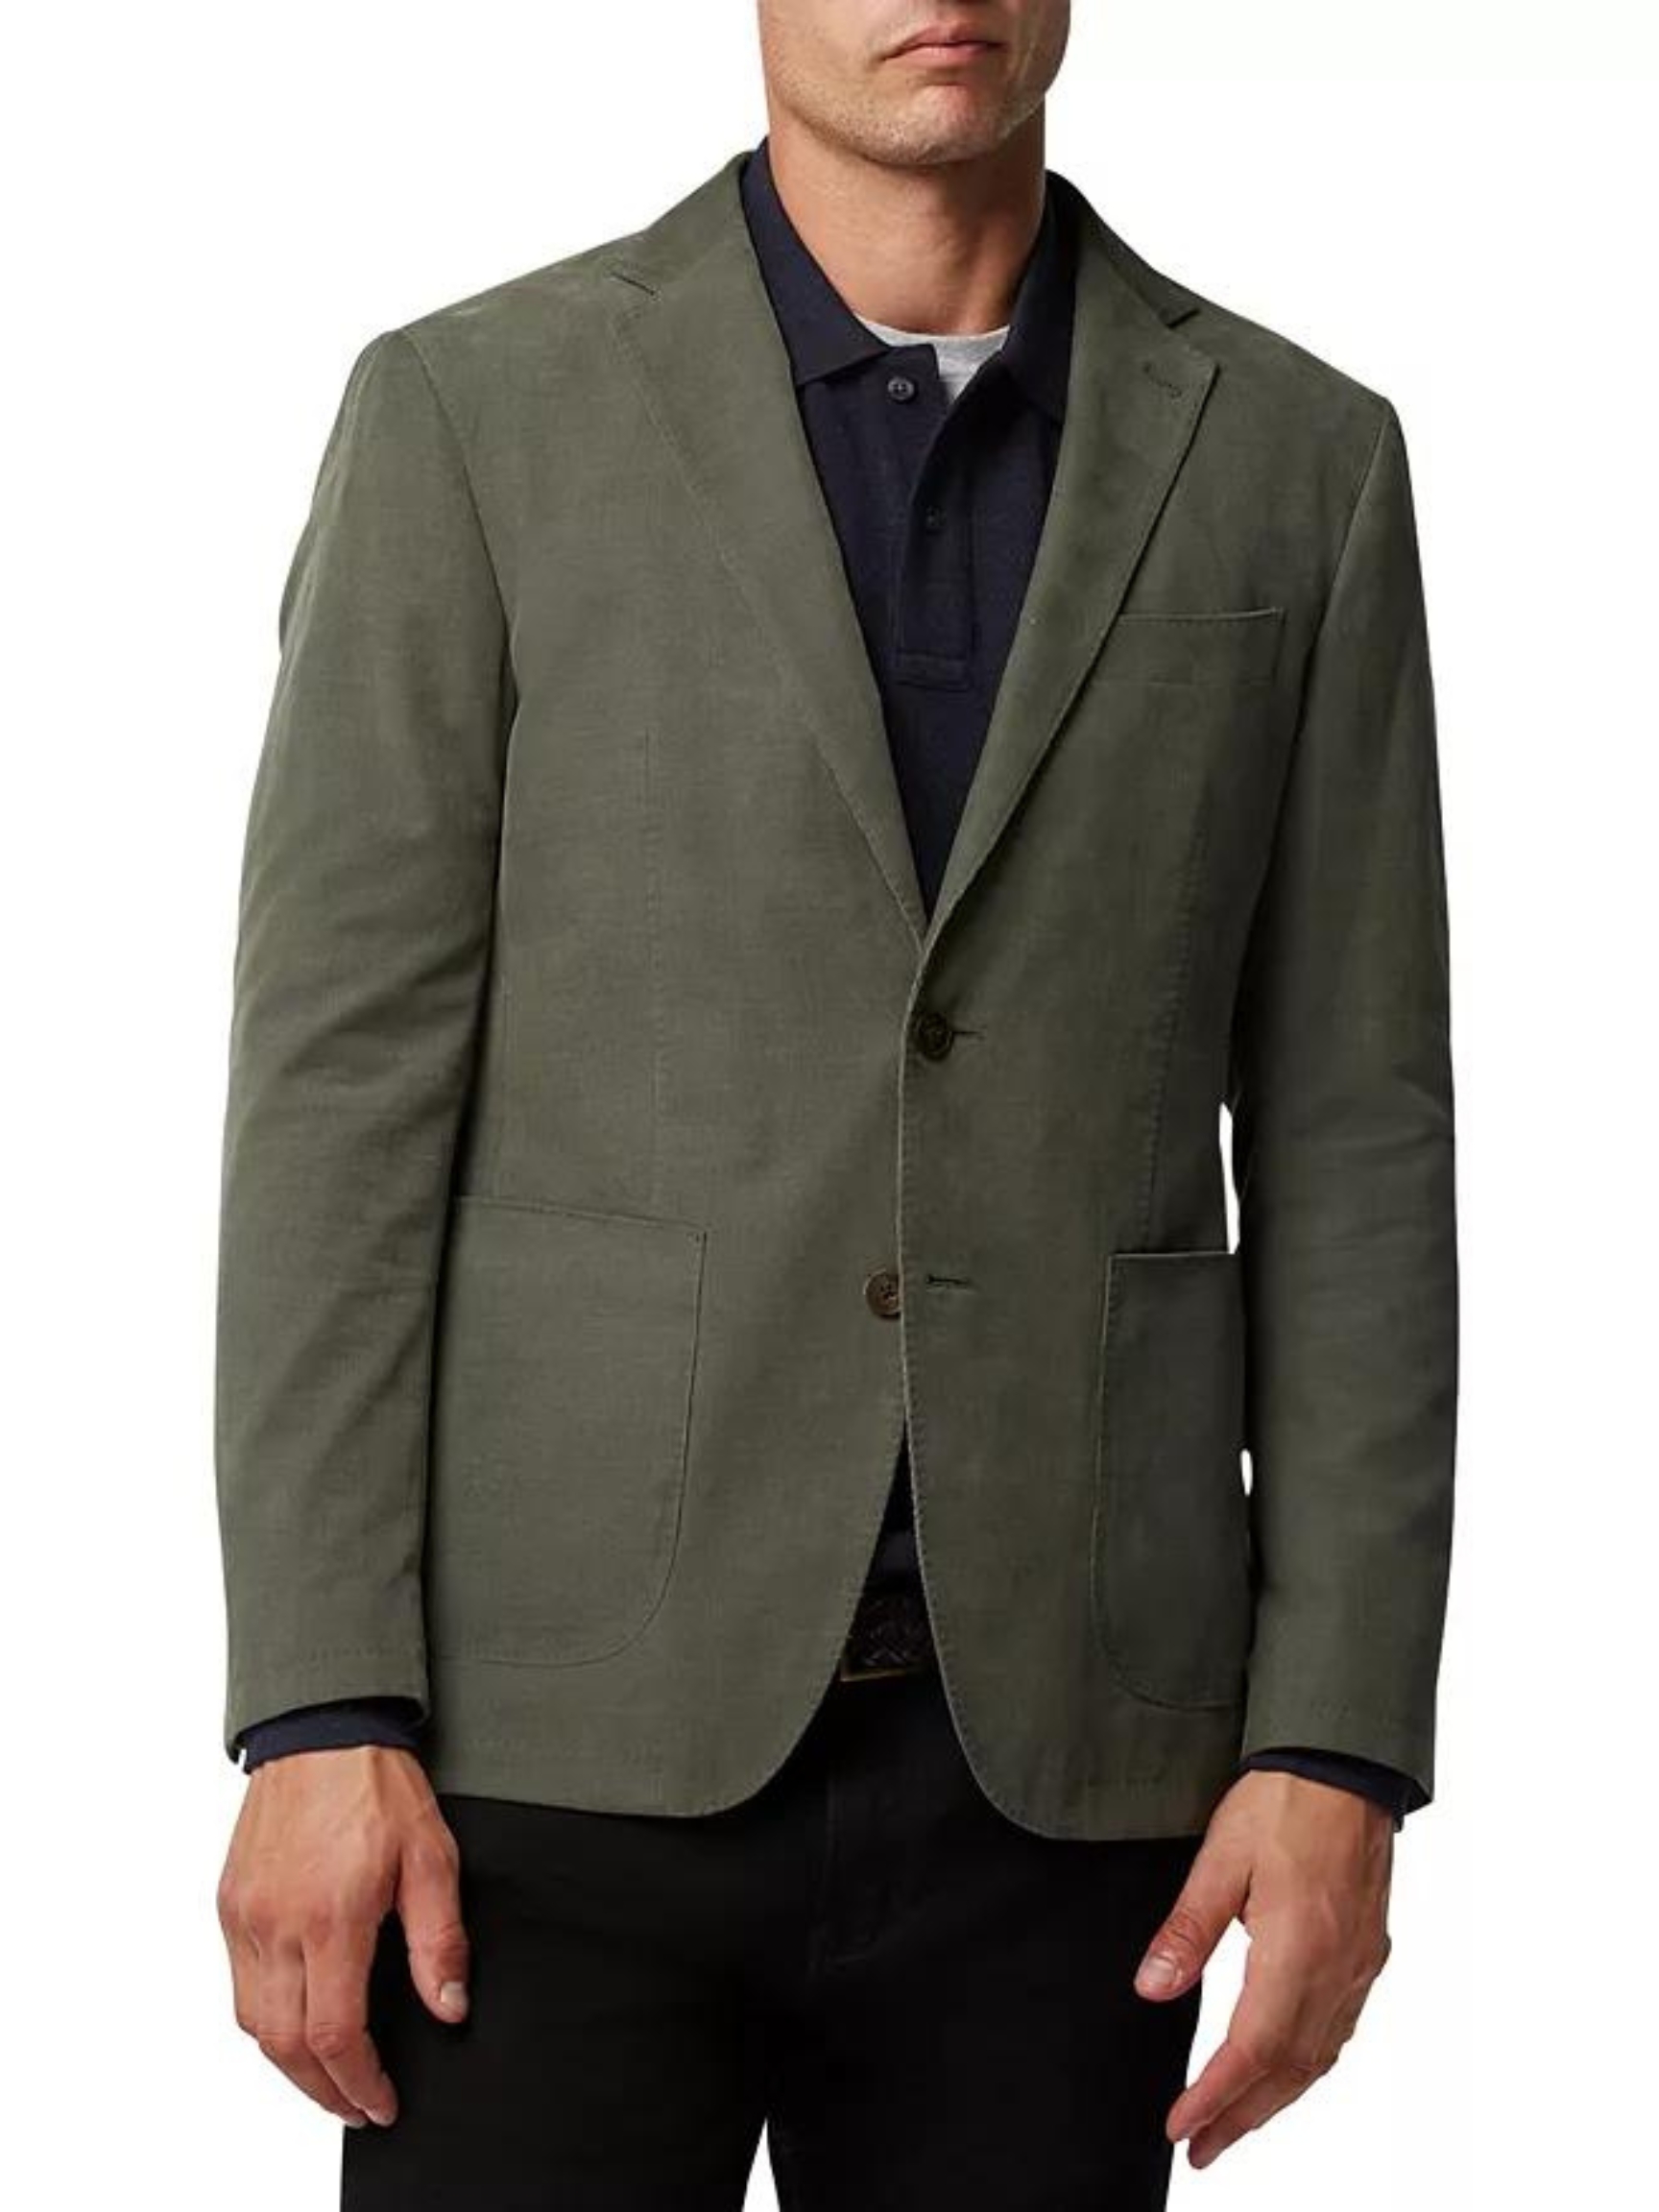 sport coat with jeans